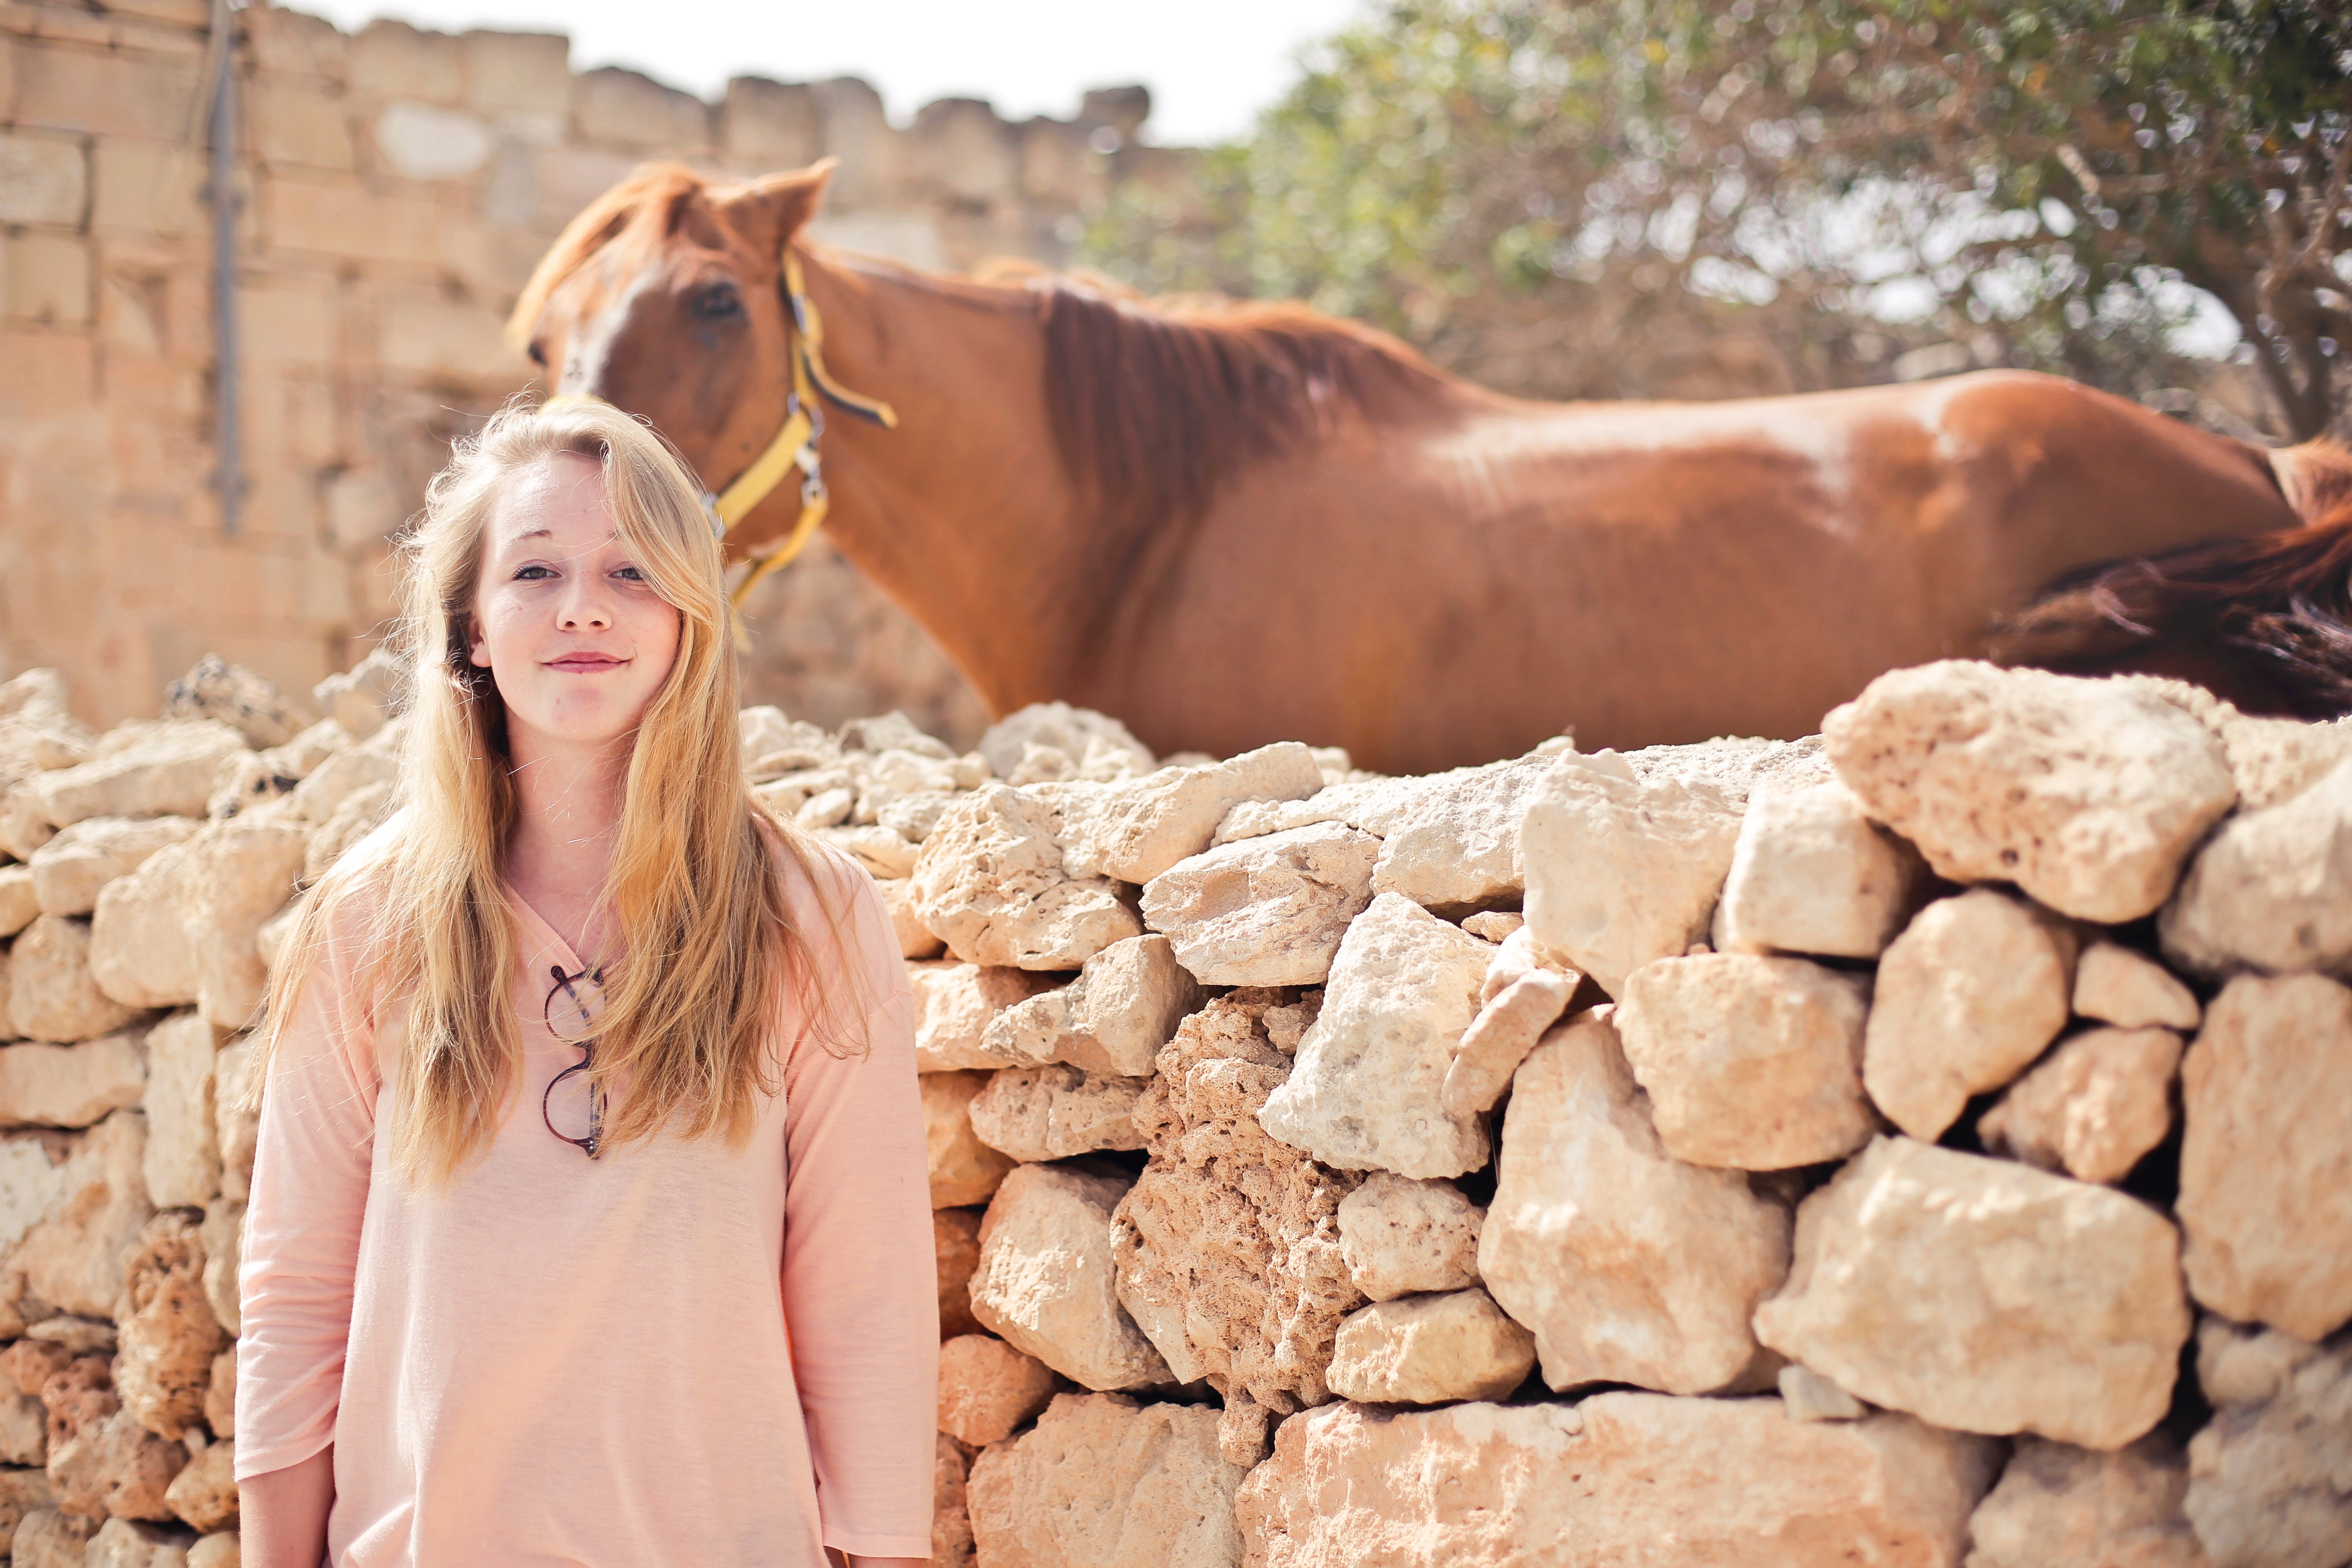 Woman Wearing Pink V-neck 3/4 Sleeved Shirt With Eyeglasses Standing in Front of Brown Horse, Adorable, Rocks, Woman, White, HQ Photo